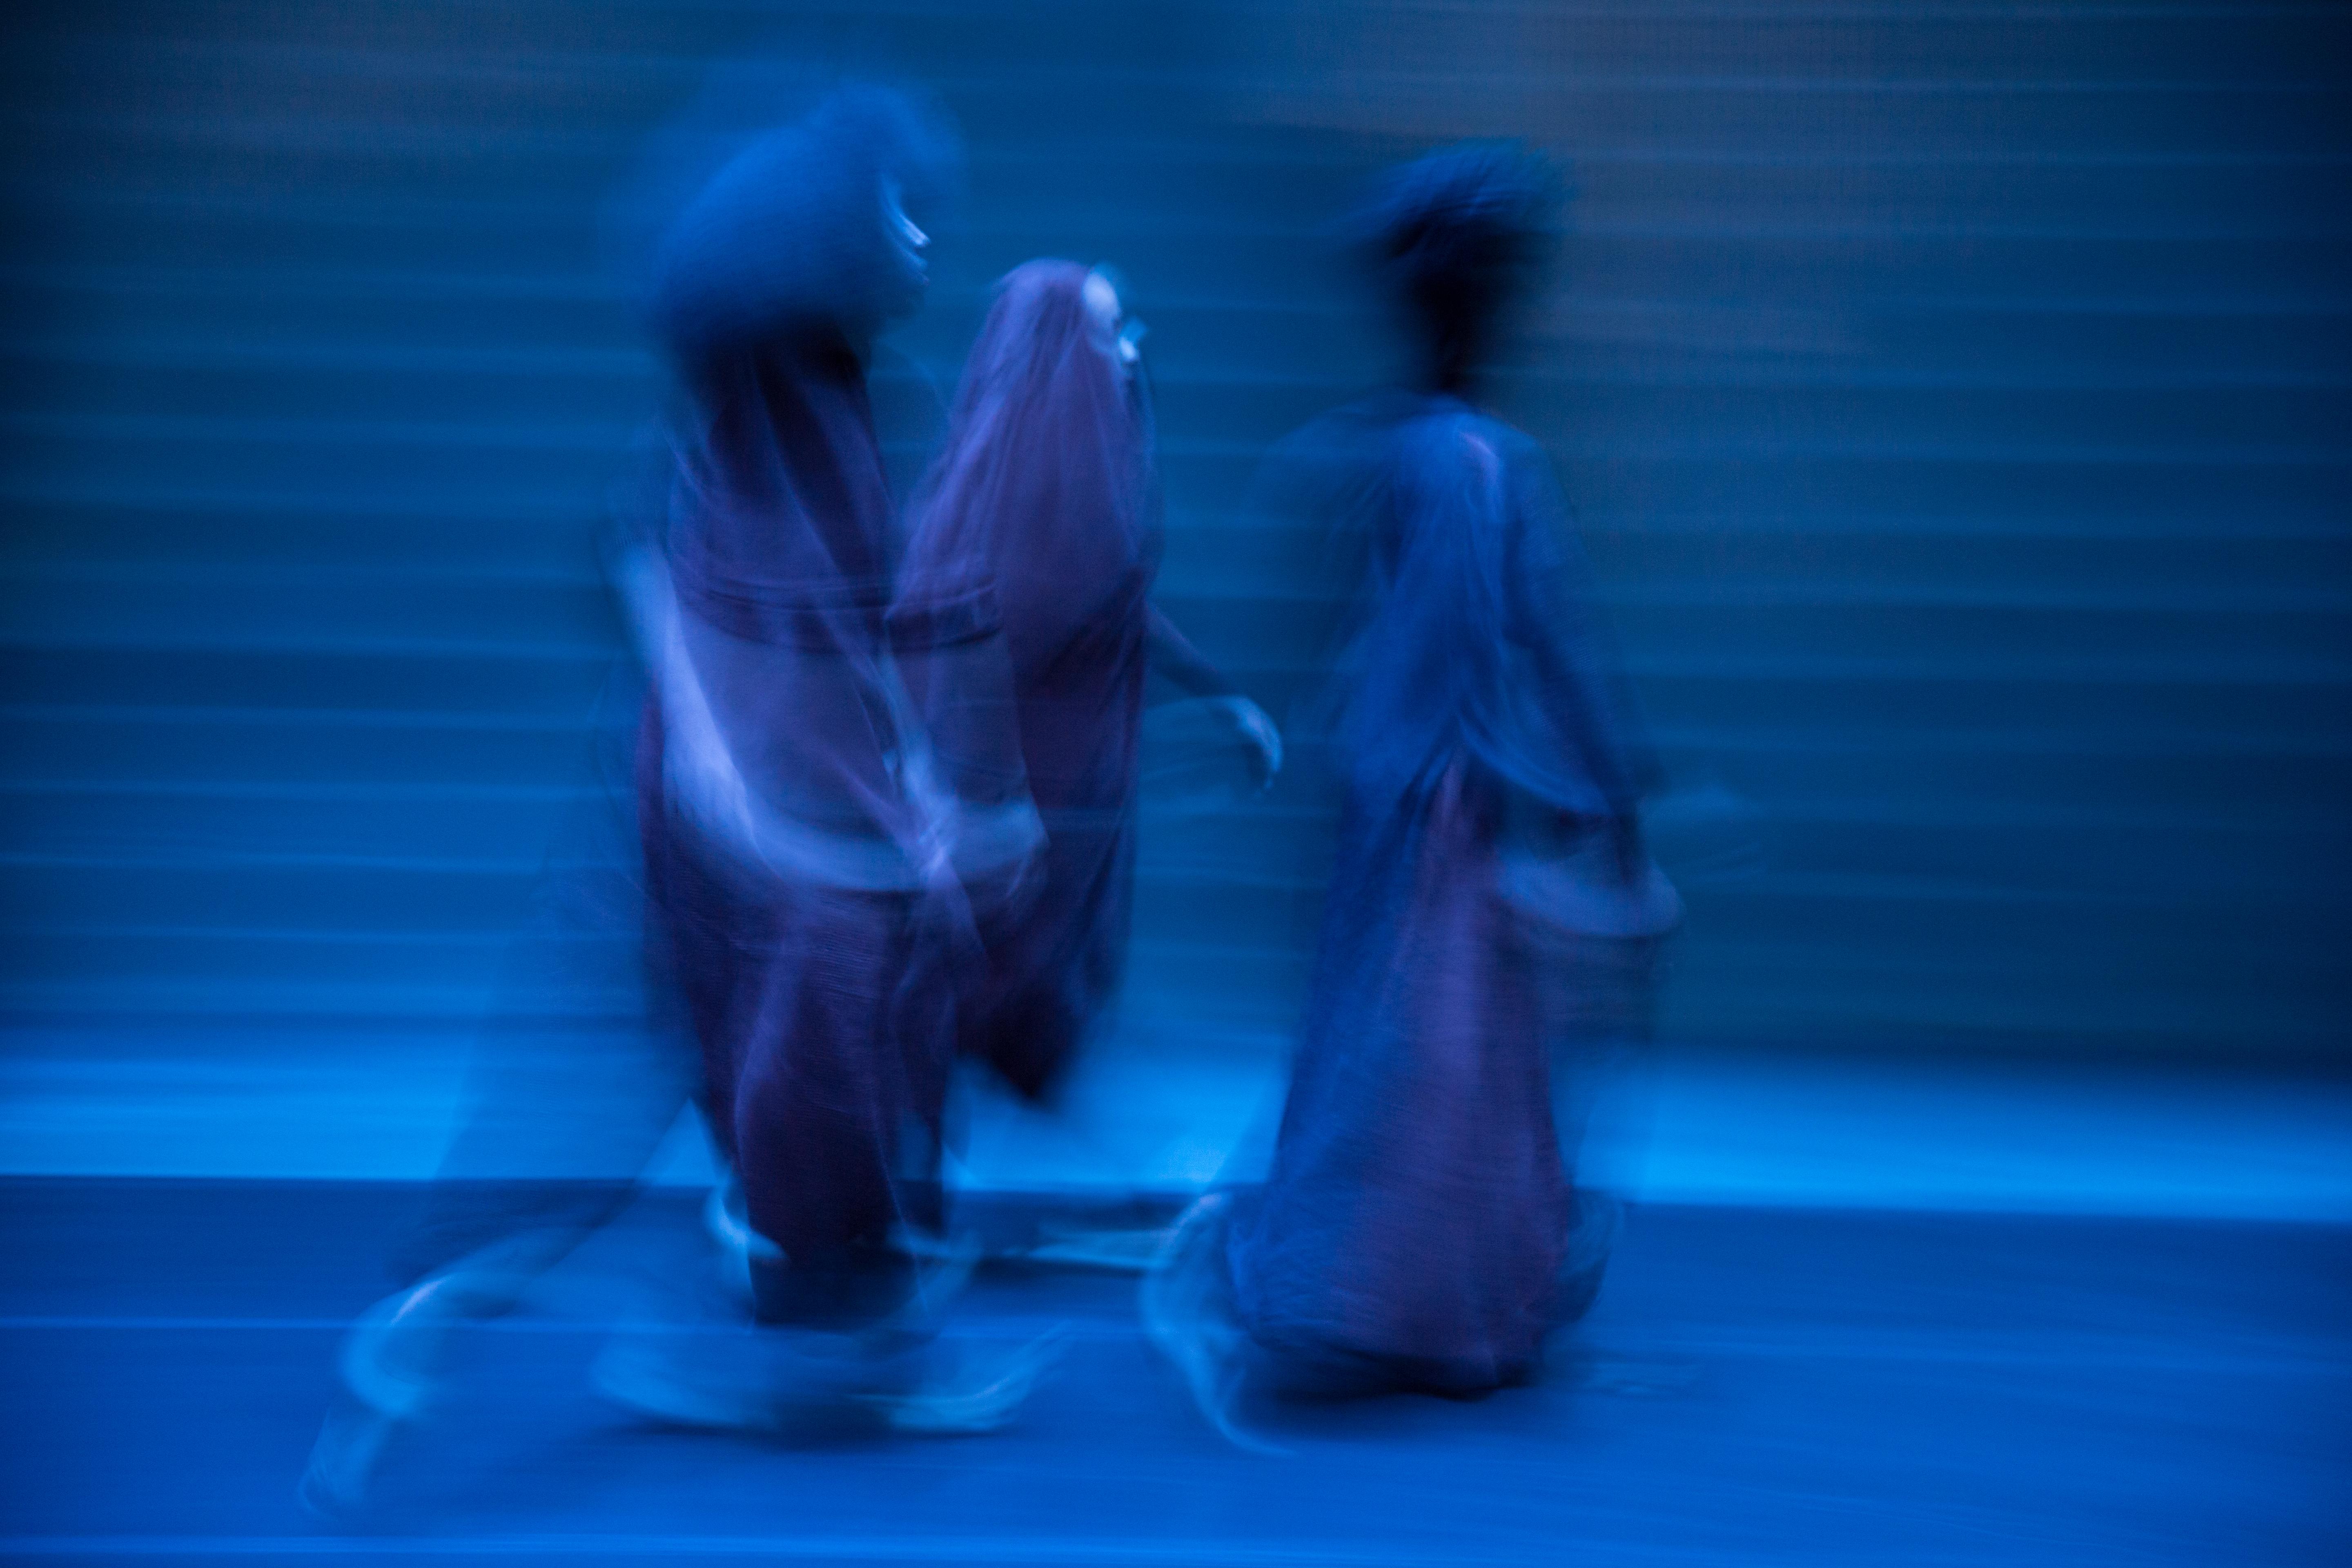 In this blue-toned photograph, three blurry, ghostlike figures in long dresses or robes walk toward the right side of the frame.